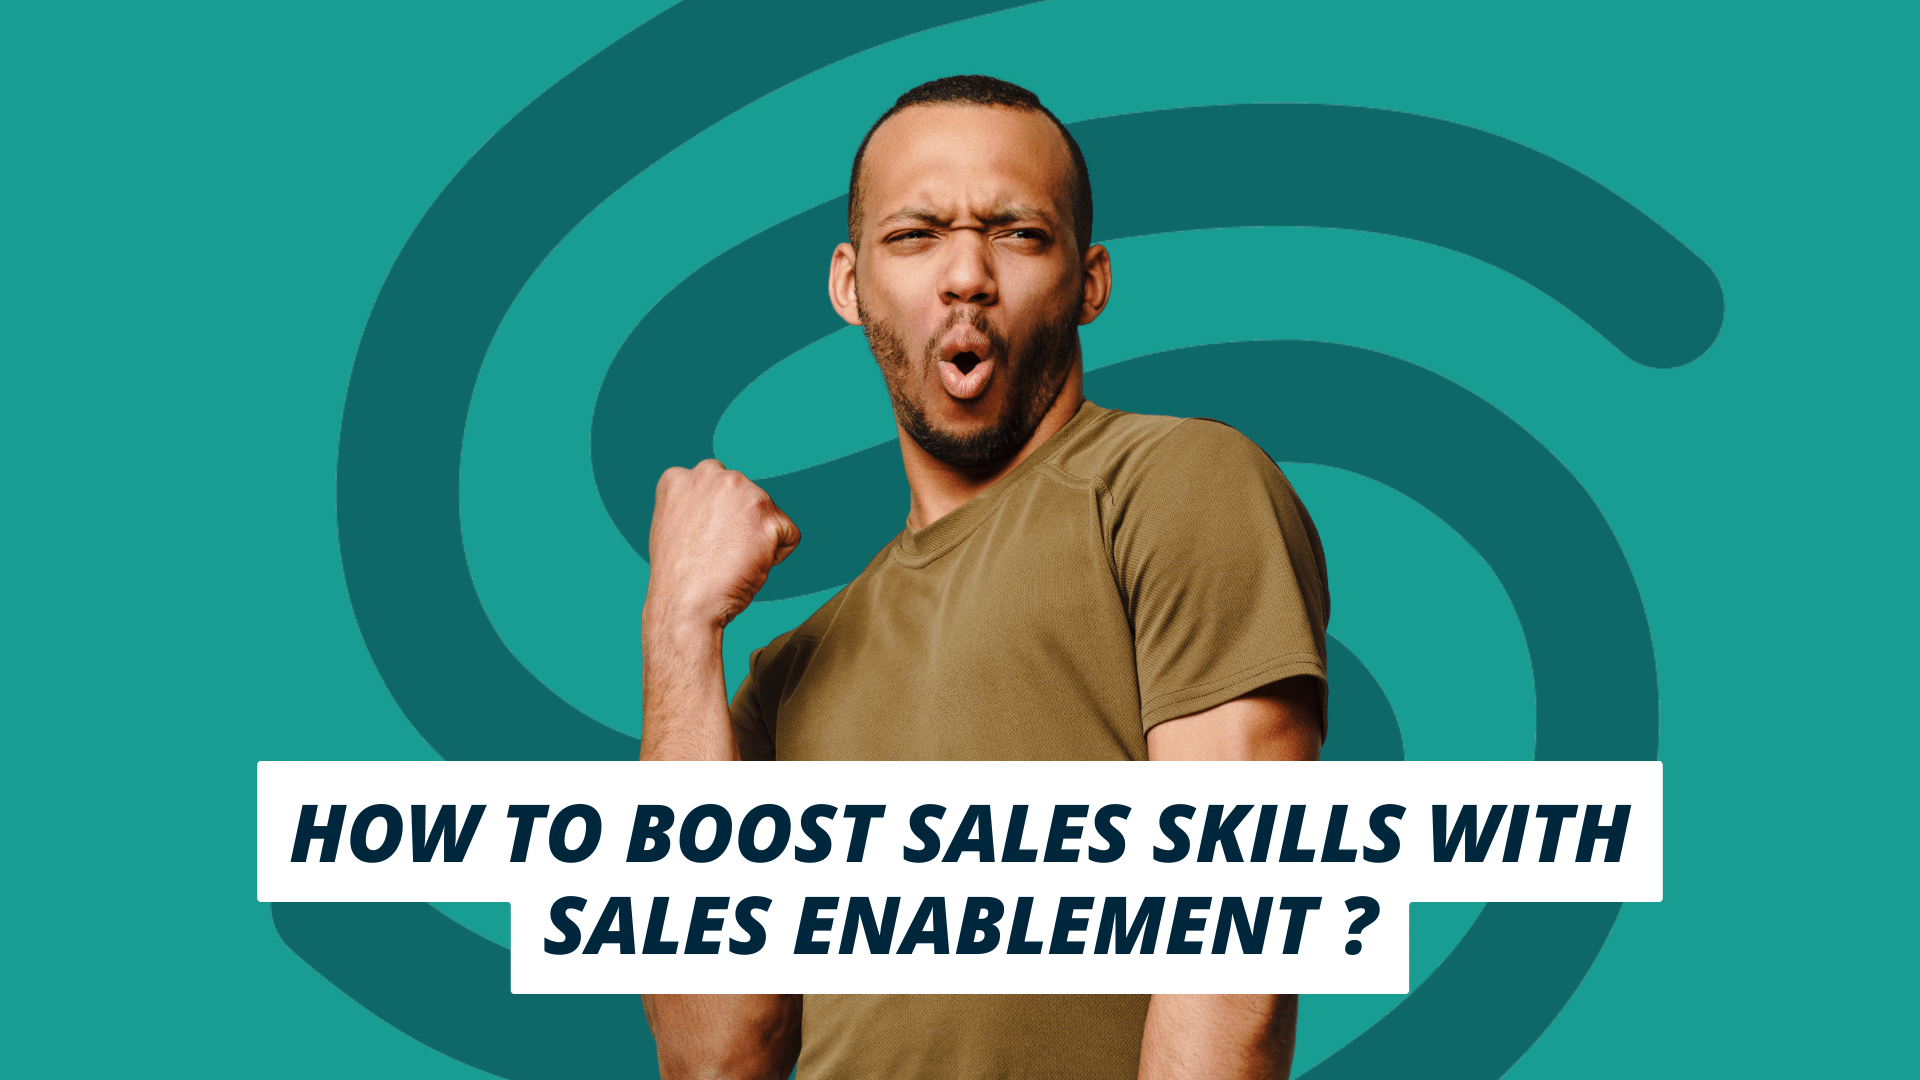 How to boost sales skills with Sales Enablement?